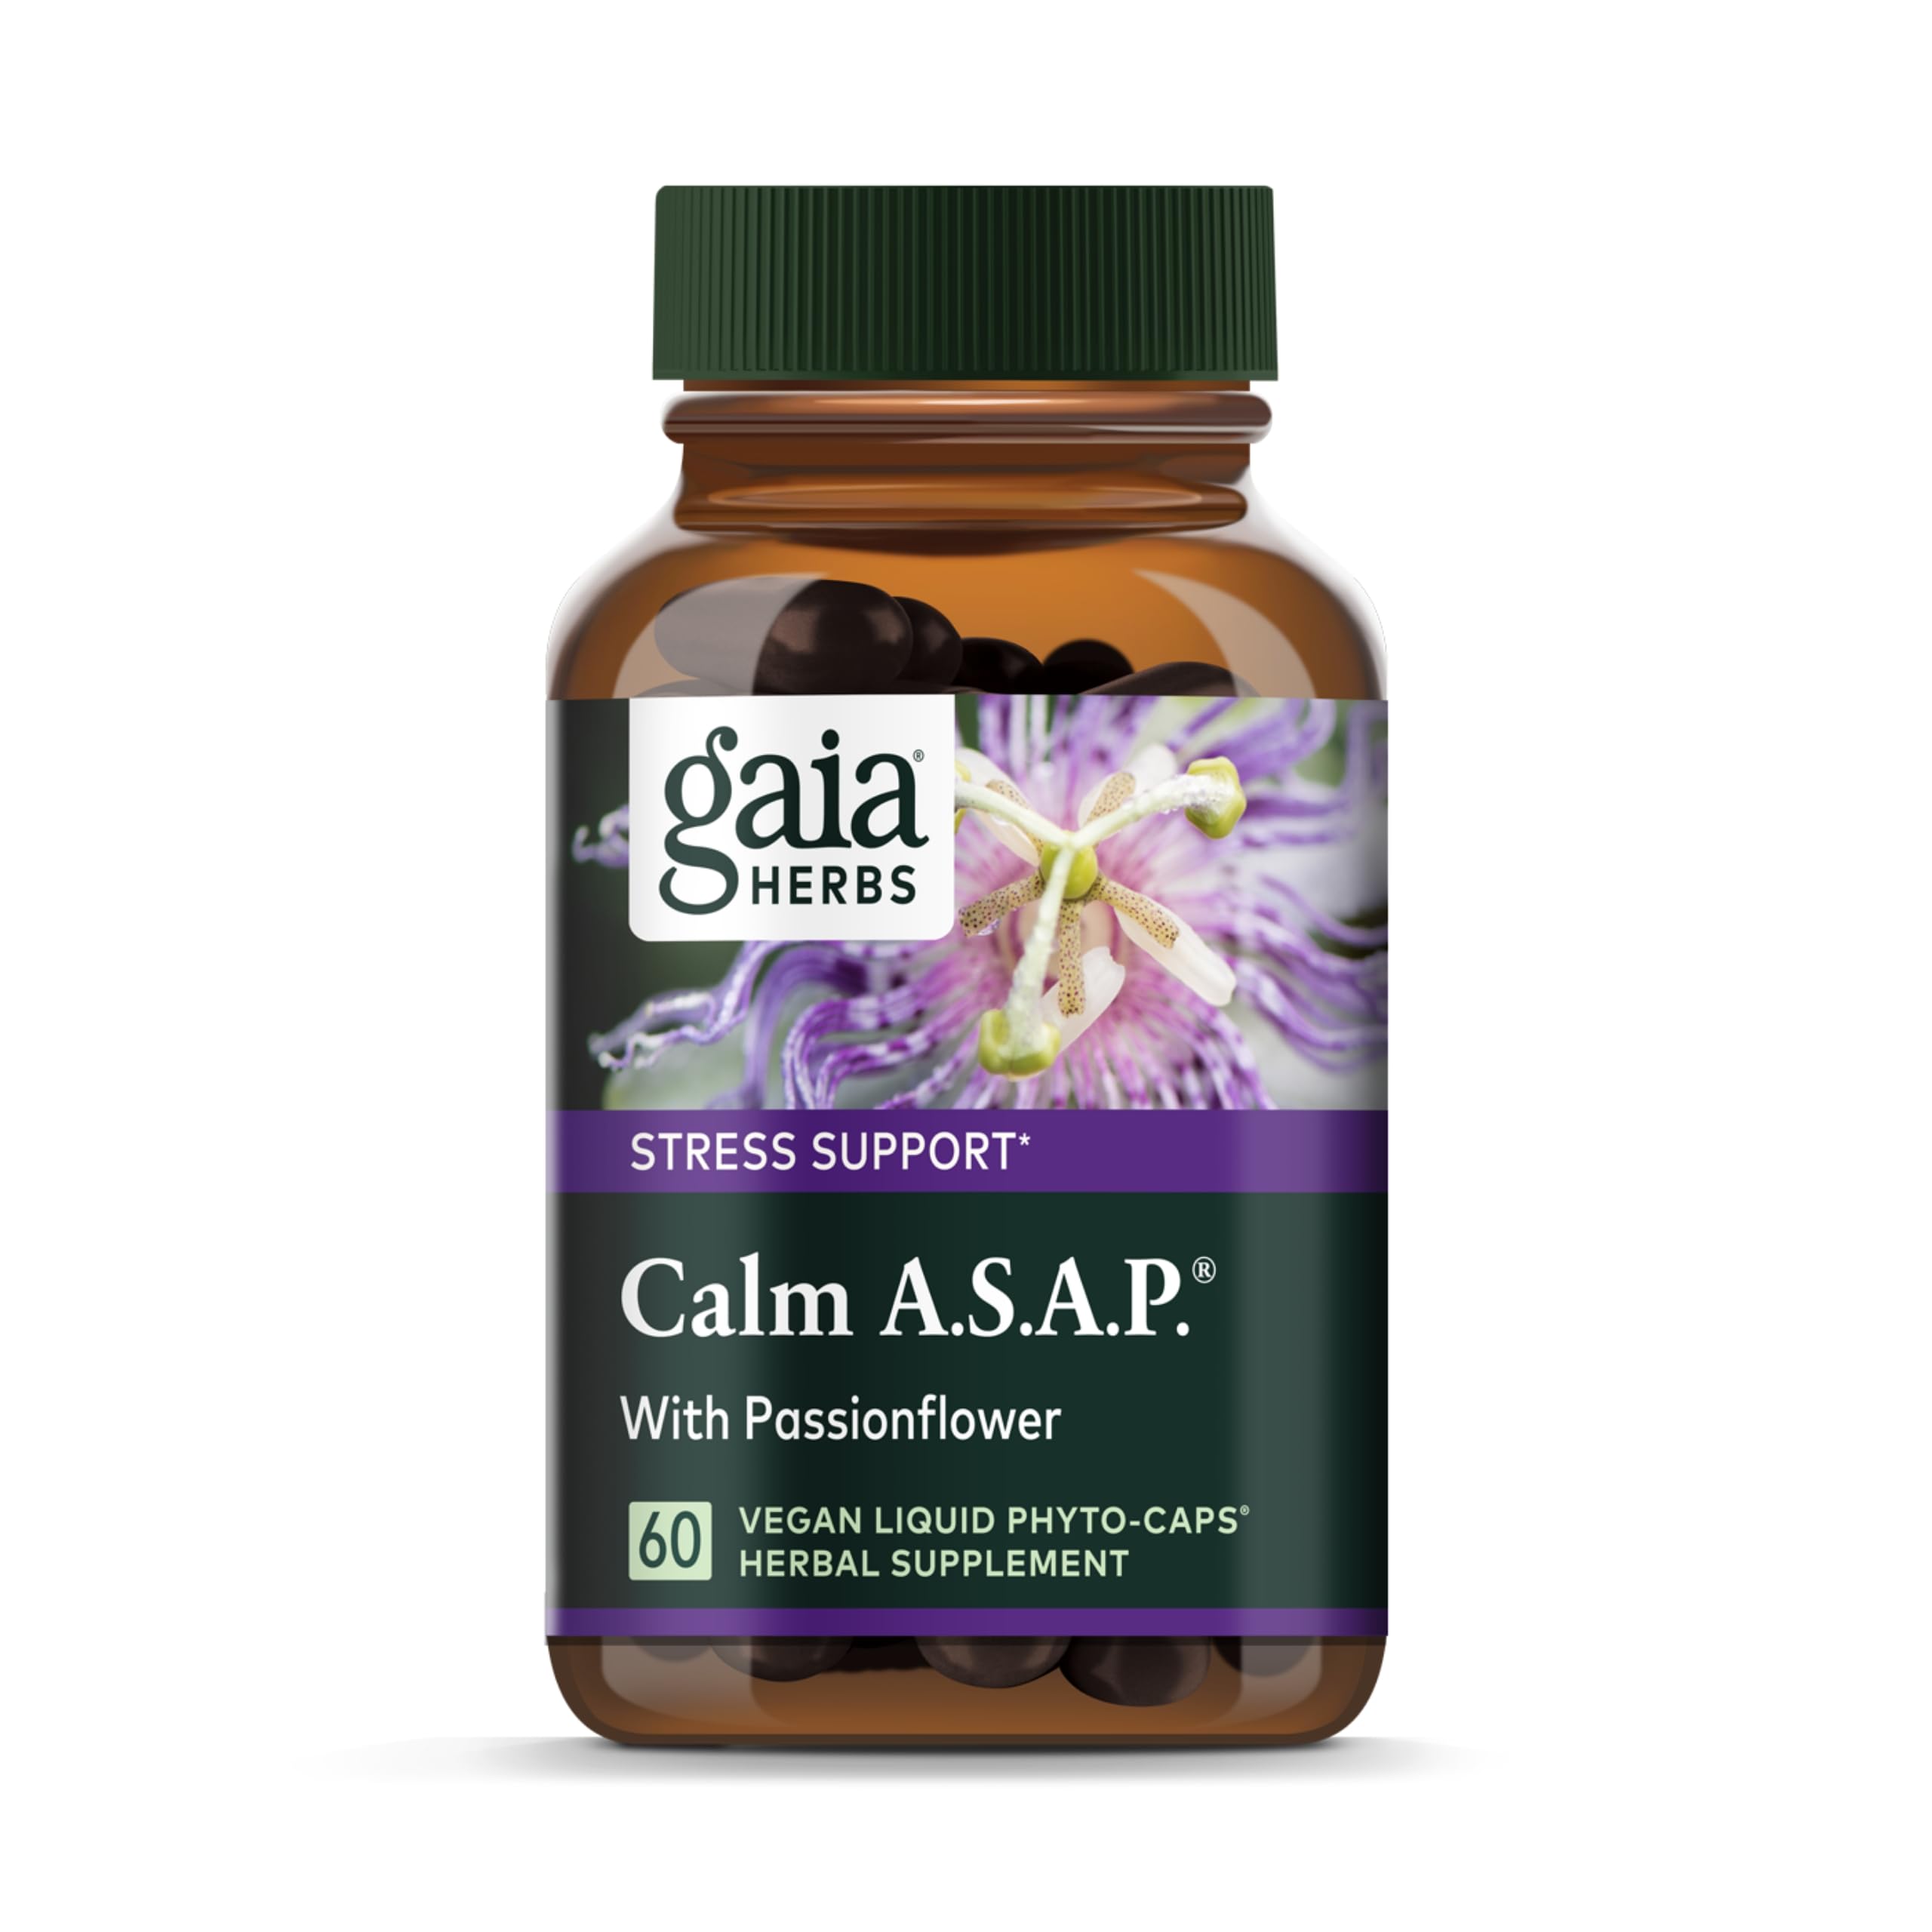 Gaia Herbs Calm A.S.A.P. Stress Support Supplement - with Skullcap, Passionflower, Chamomile, Vervain, Holy Basil & More to Supp